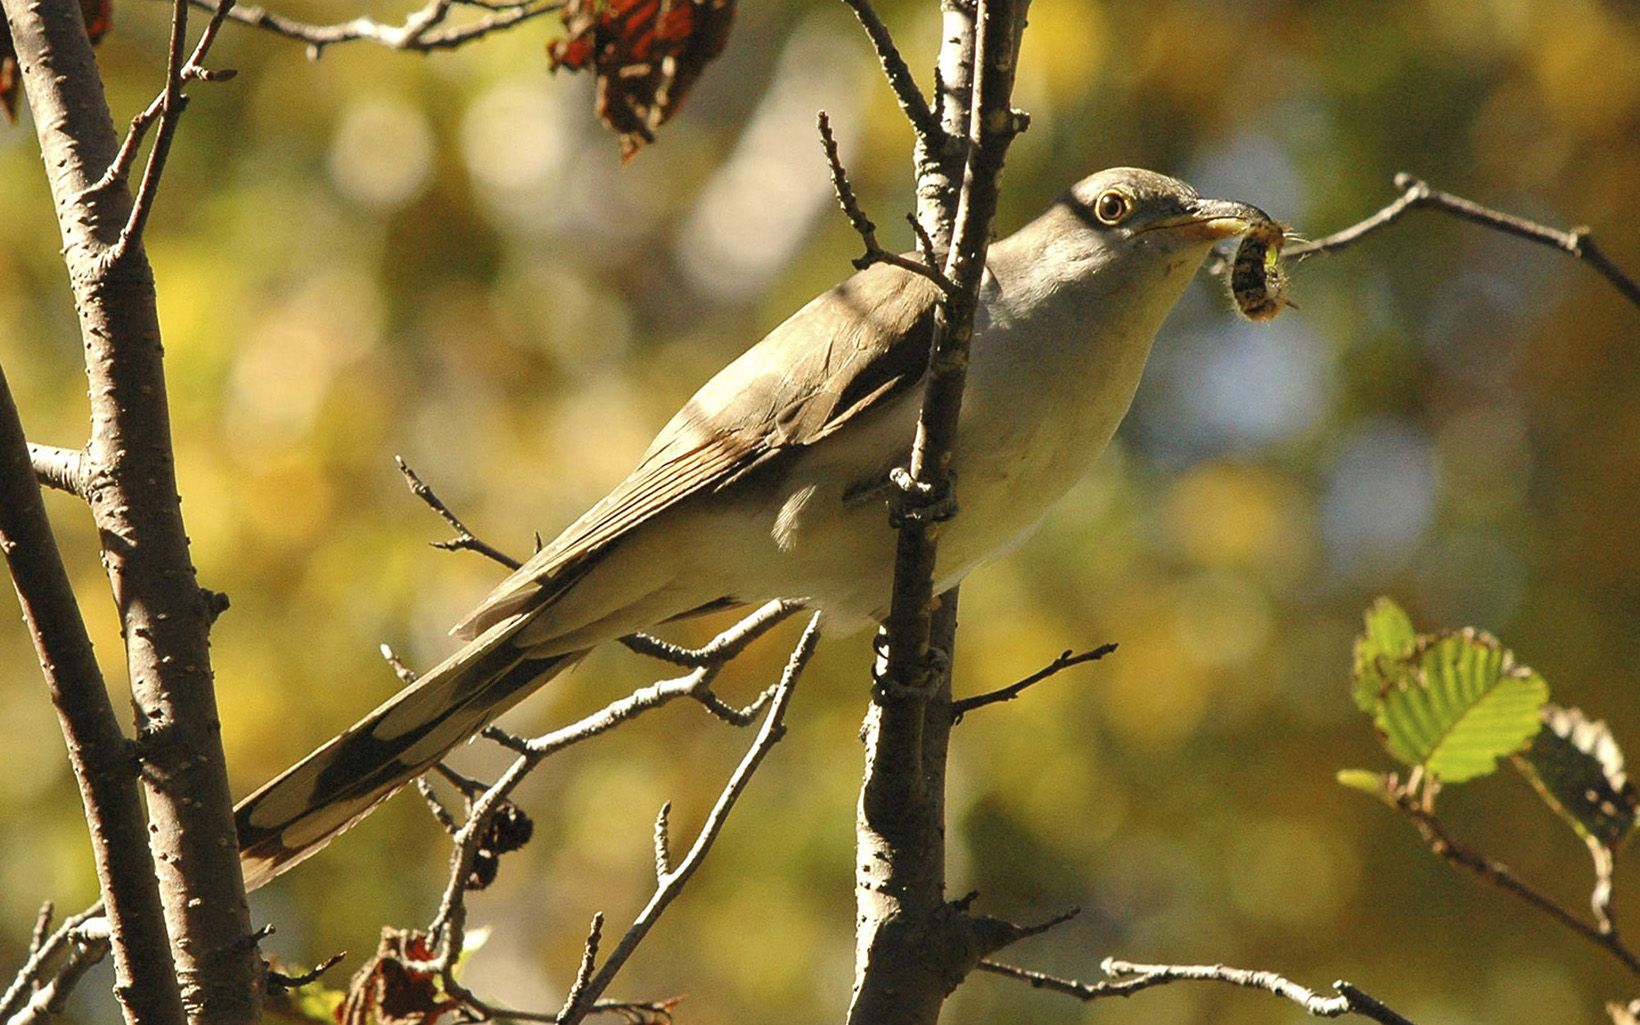 Yellowish bird with bug in its mouth perched on branch.